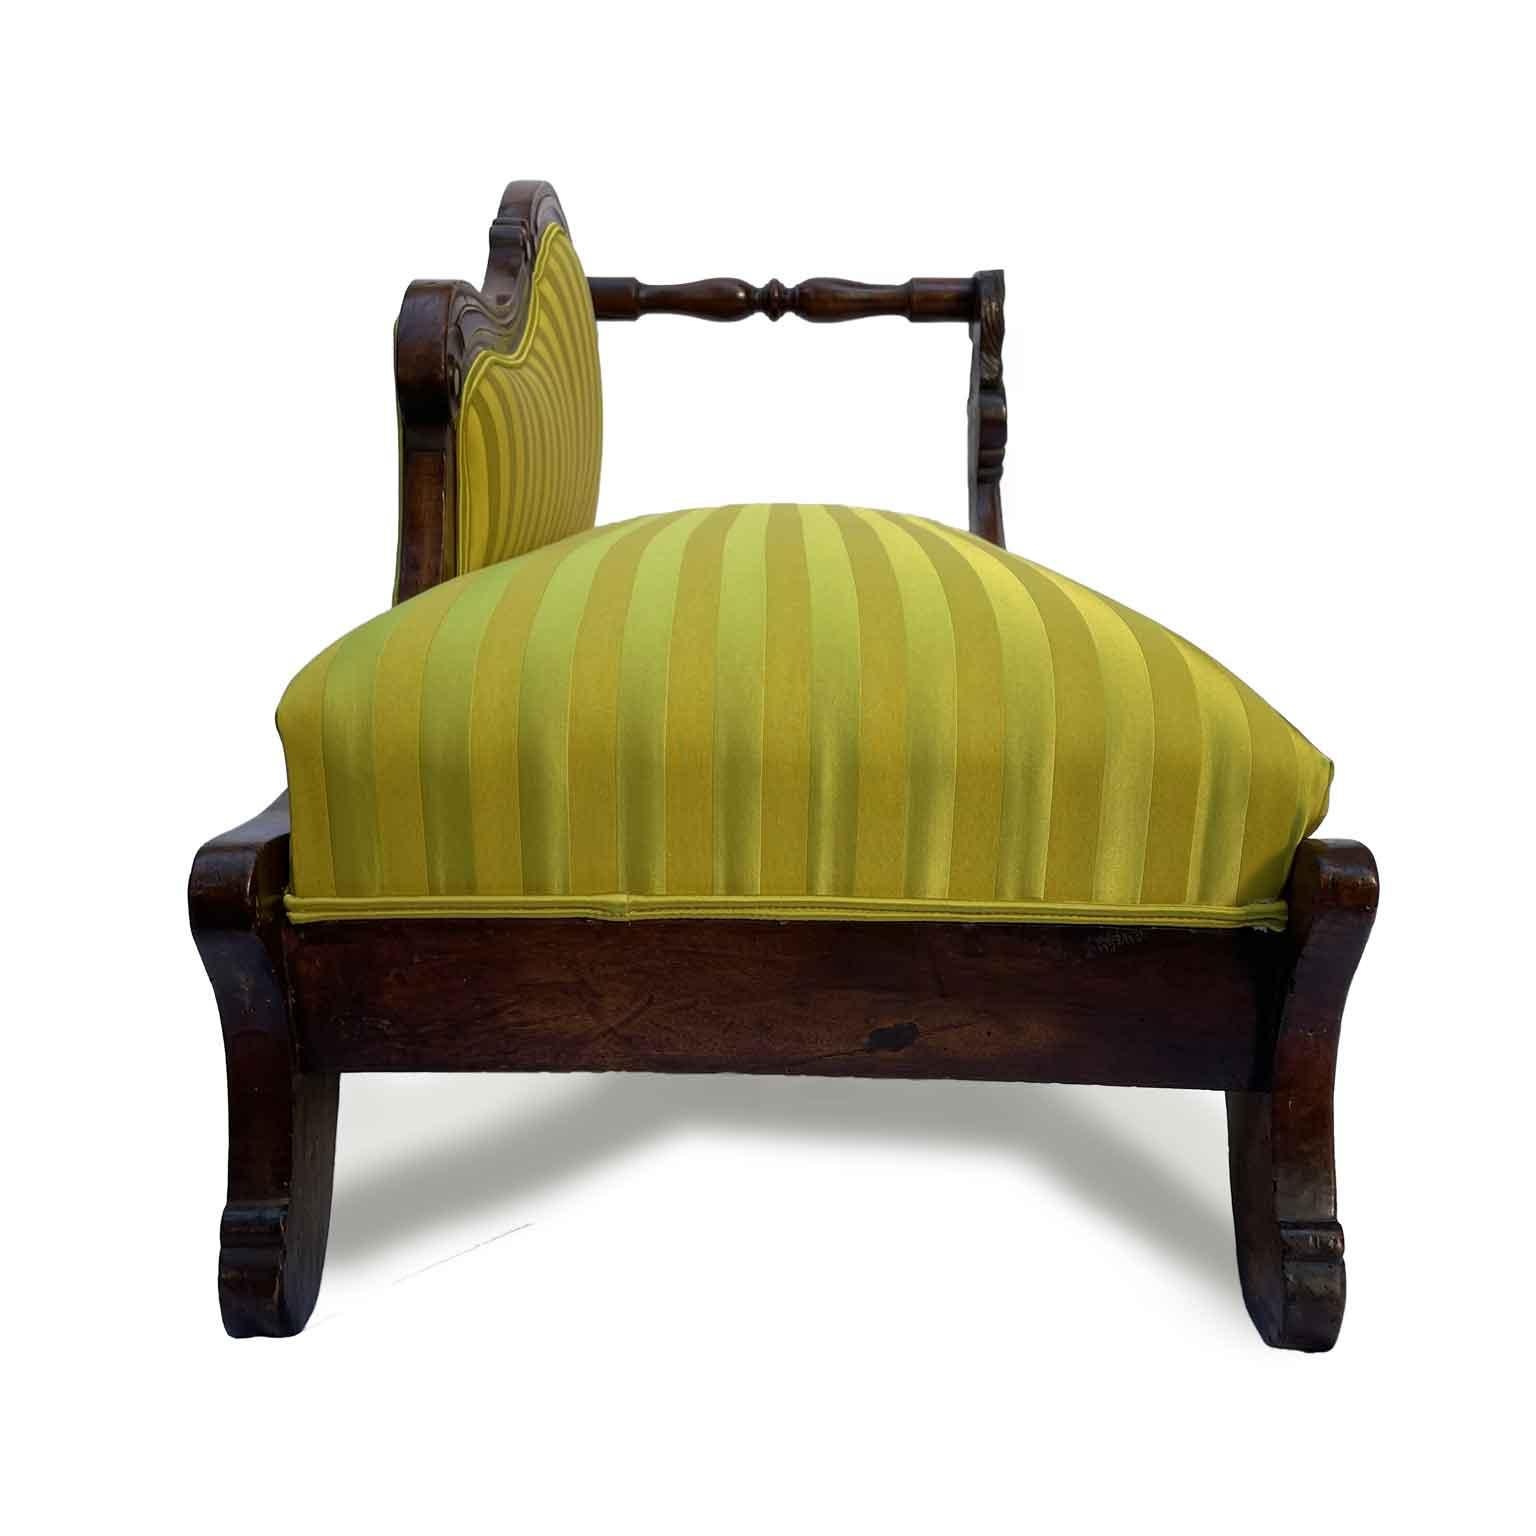 Italian Center Dormeuse in Carved Walnut circa 1850 Yellow Fabric For Sale 1